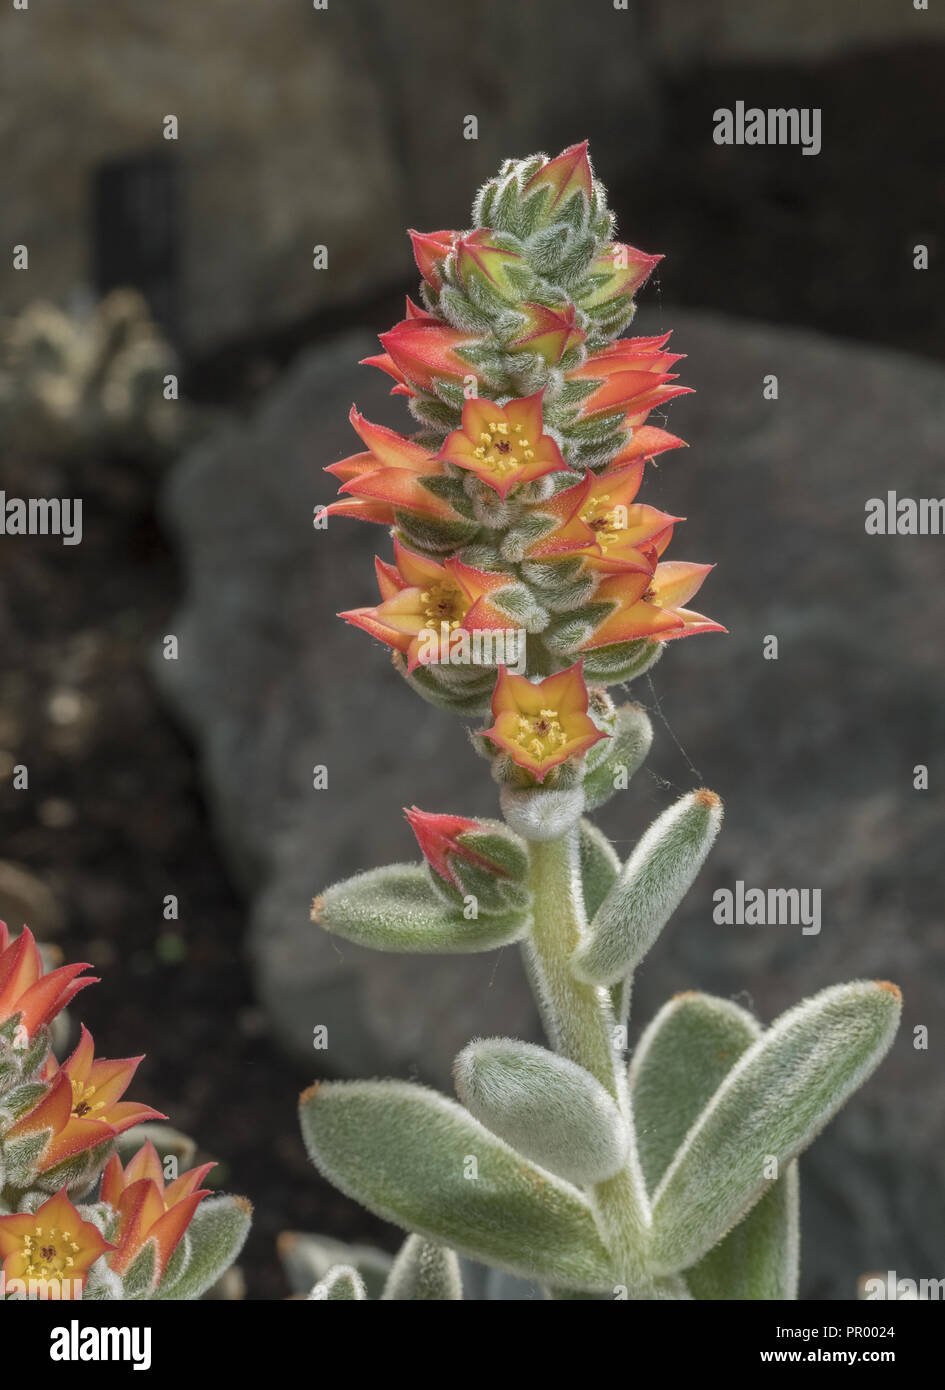 Chenille Plant, Echeveria leucotricha, in flower; succulent from Mexico. Stock Photo